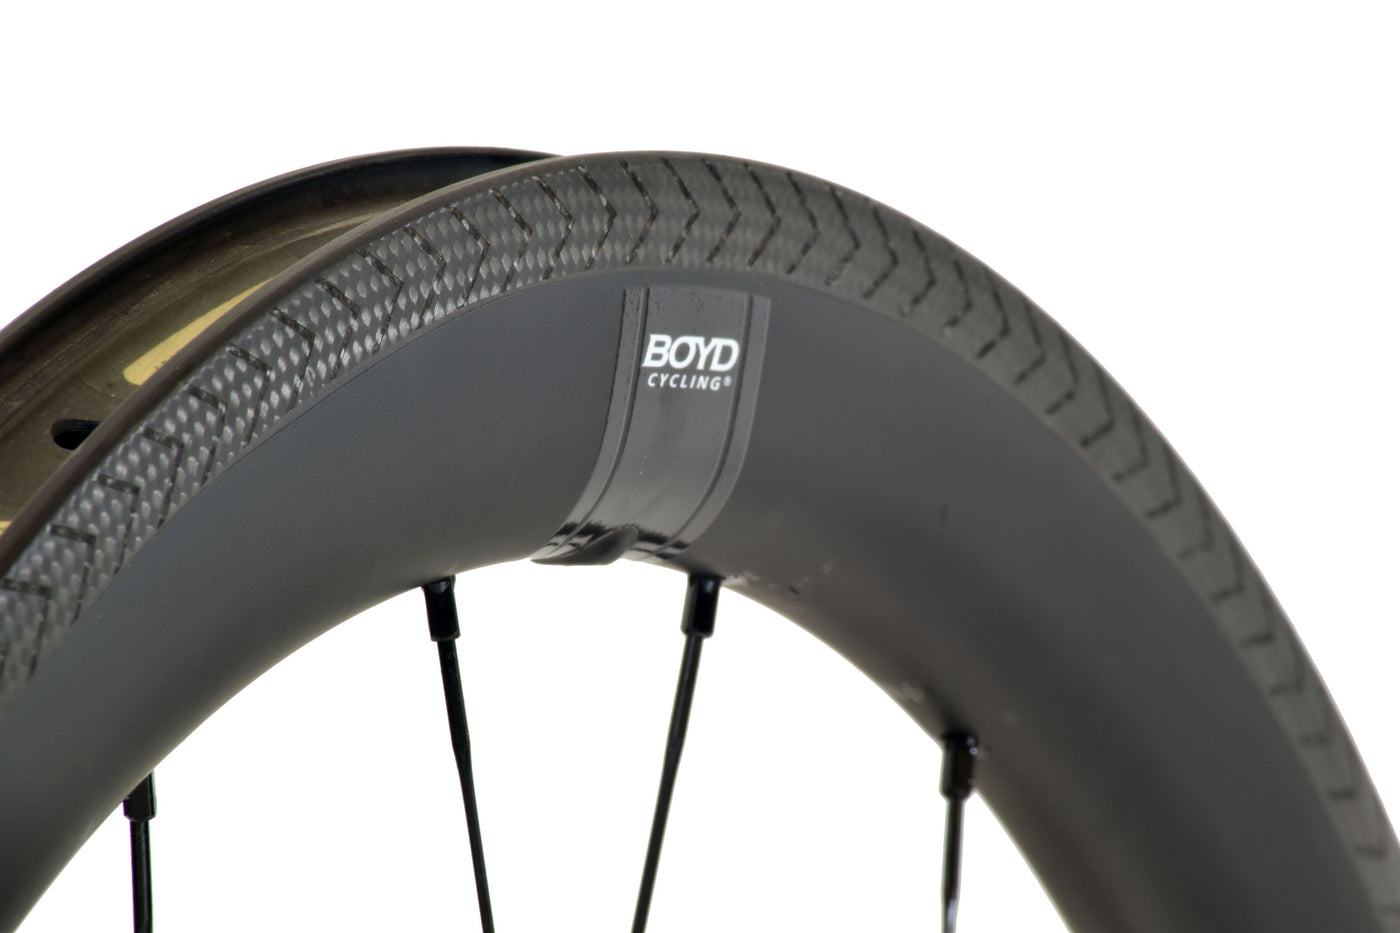 44mm Carbon Clincher Front Wheel